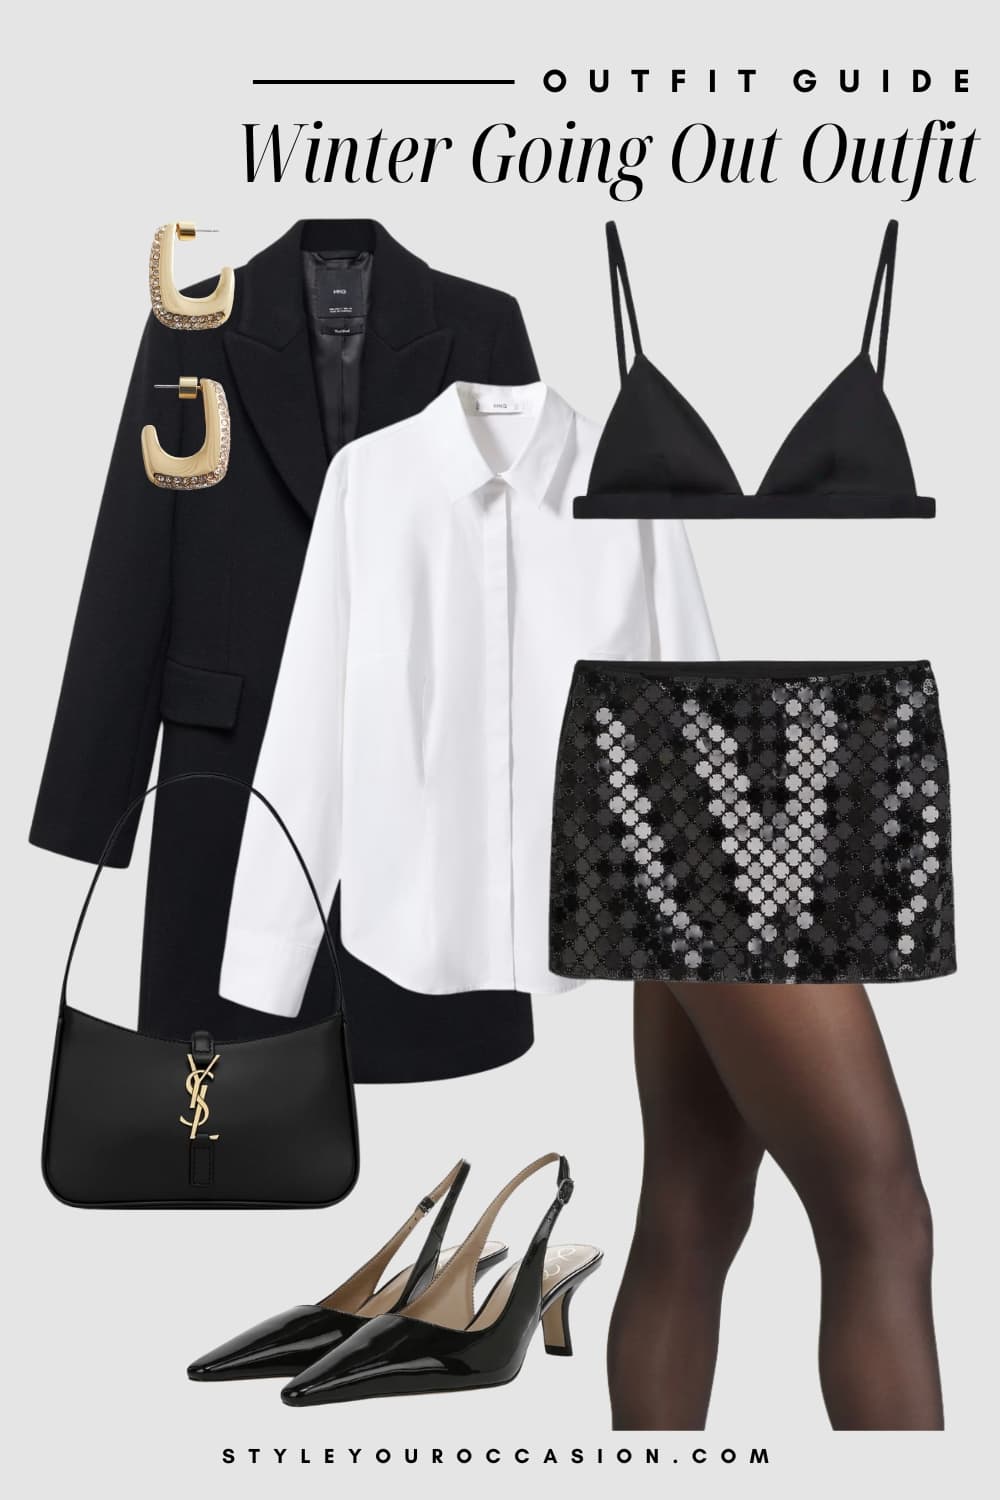 winter going out outfit graphic with a black wool coat, white button up shirt, sequin skirt, bralette, and slingback heels